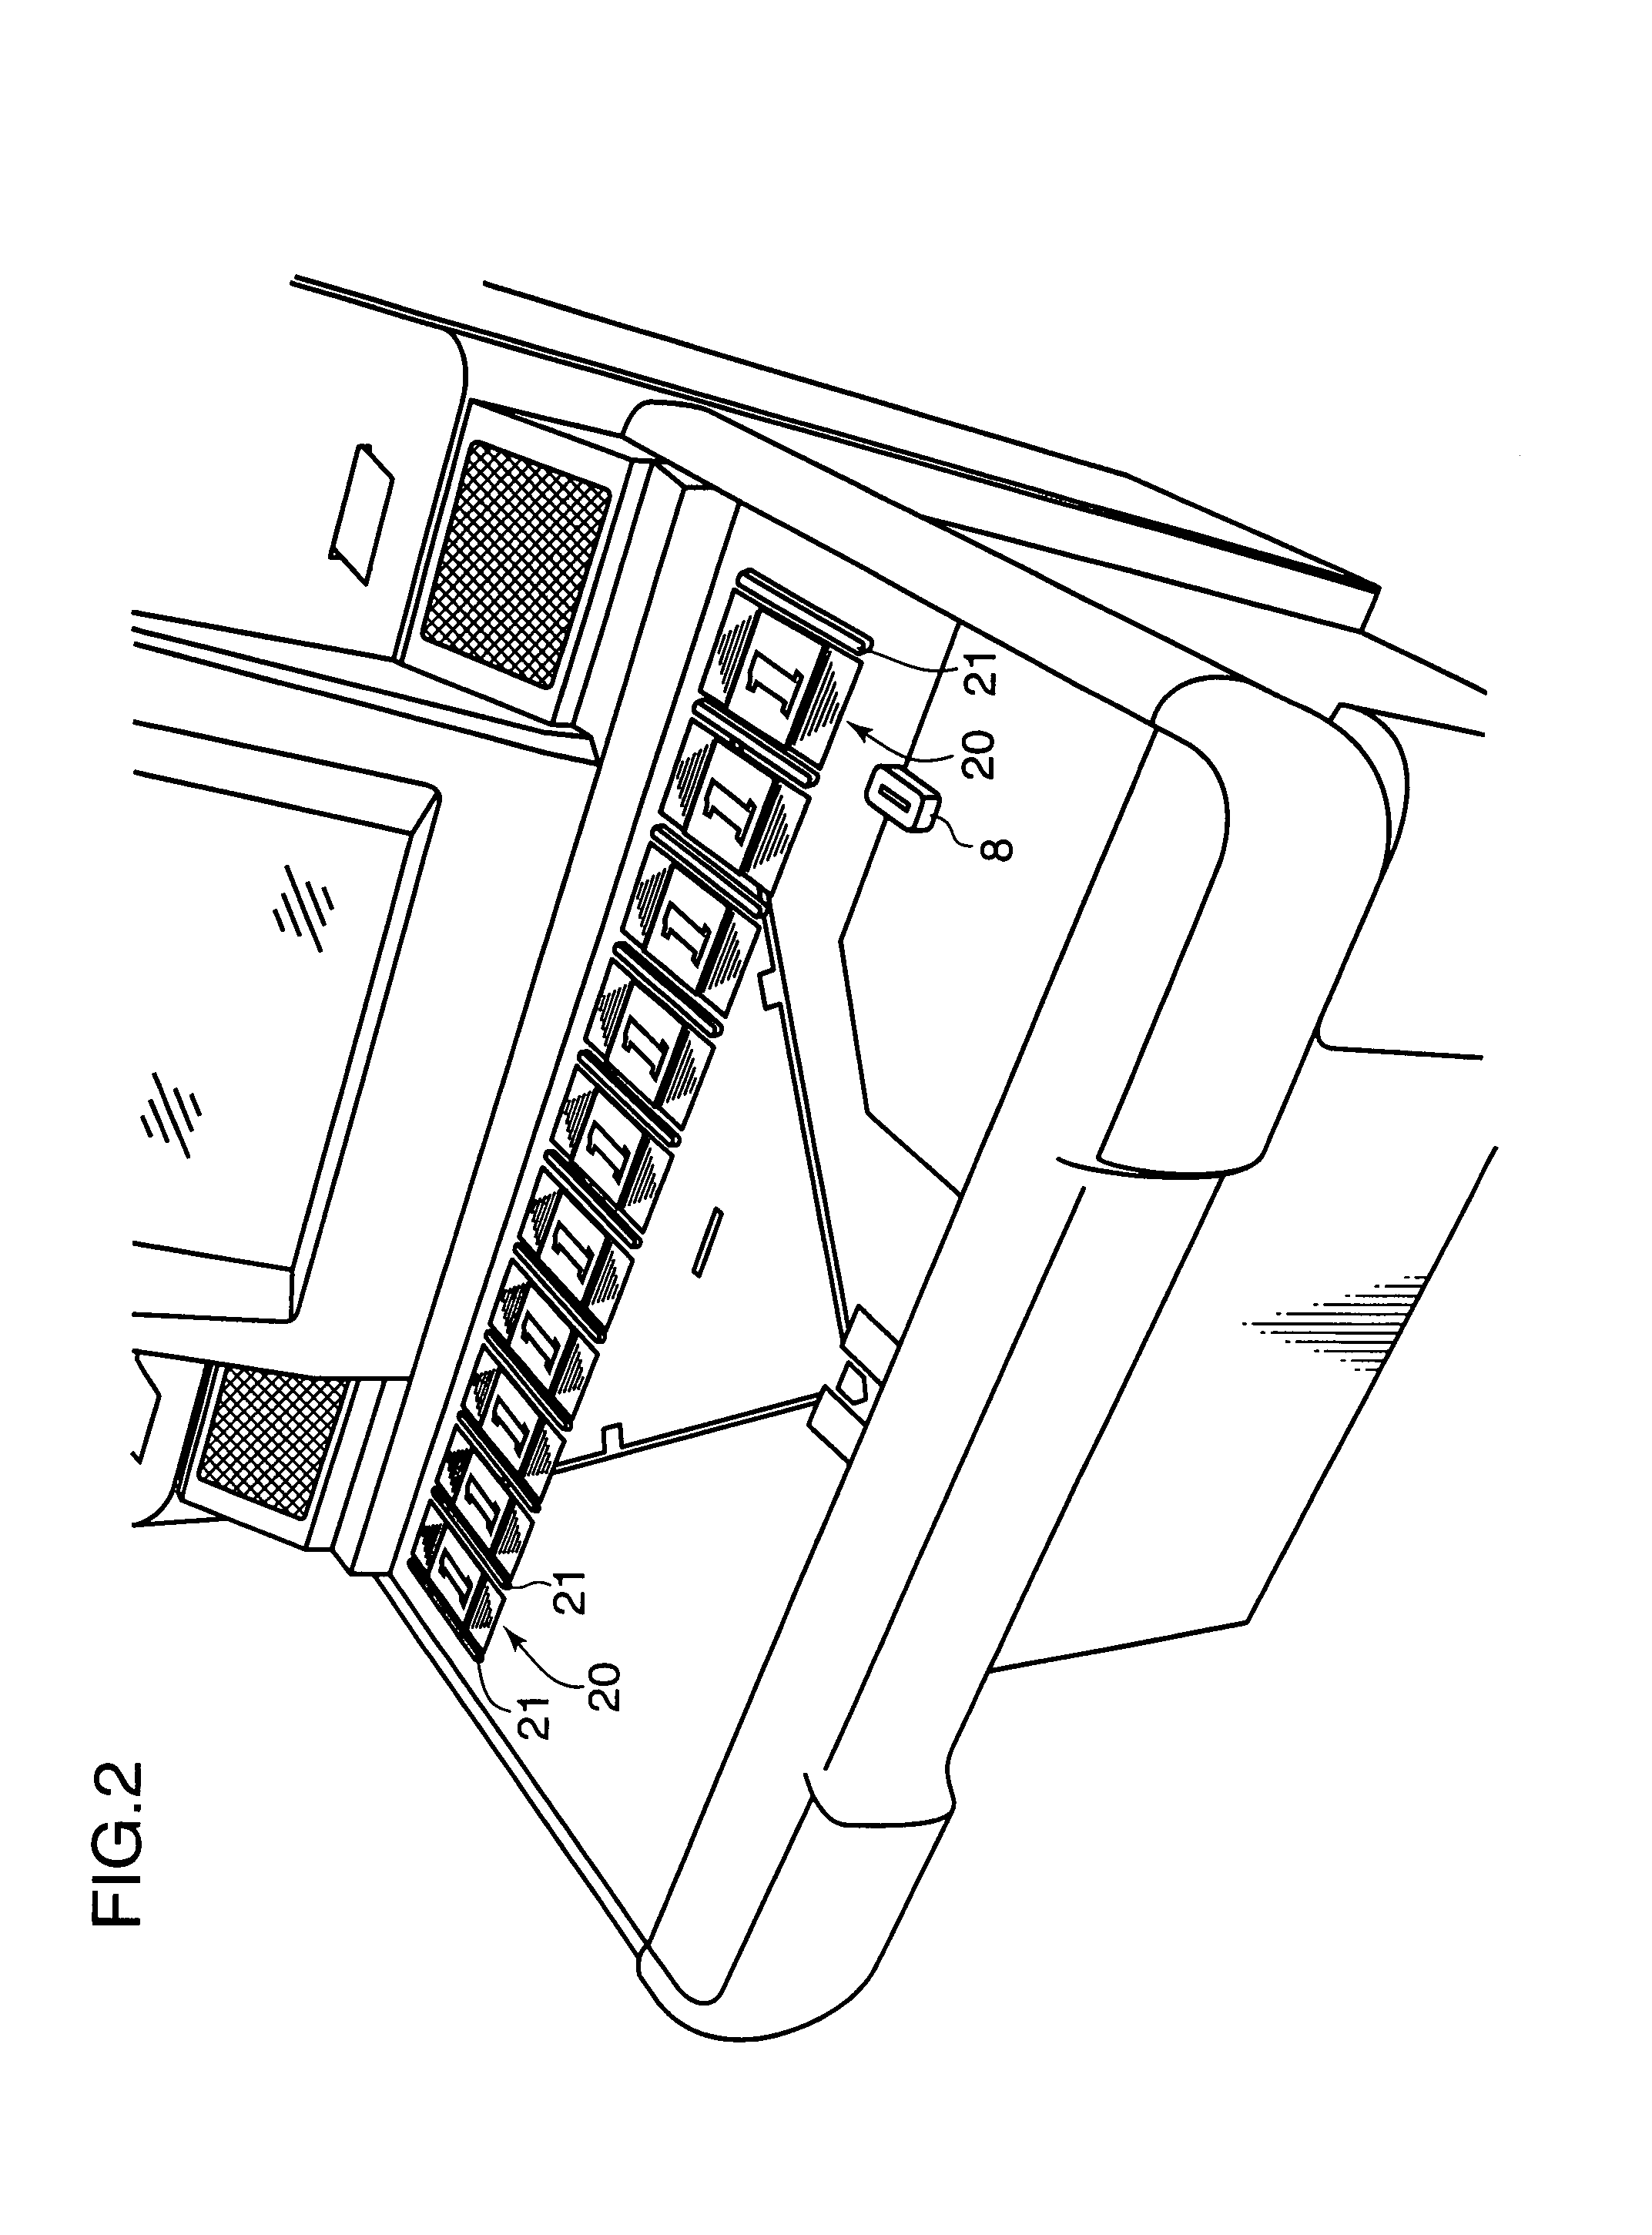 Game apparatus, game system and game progression control method